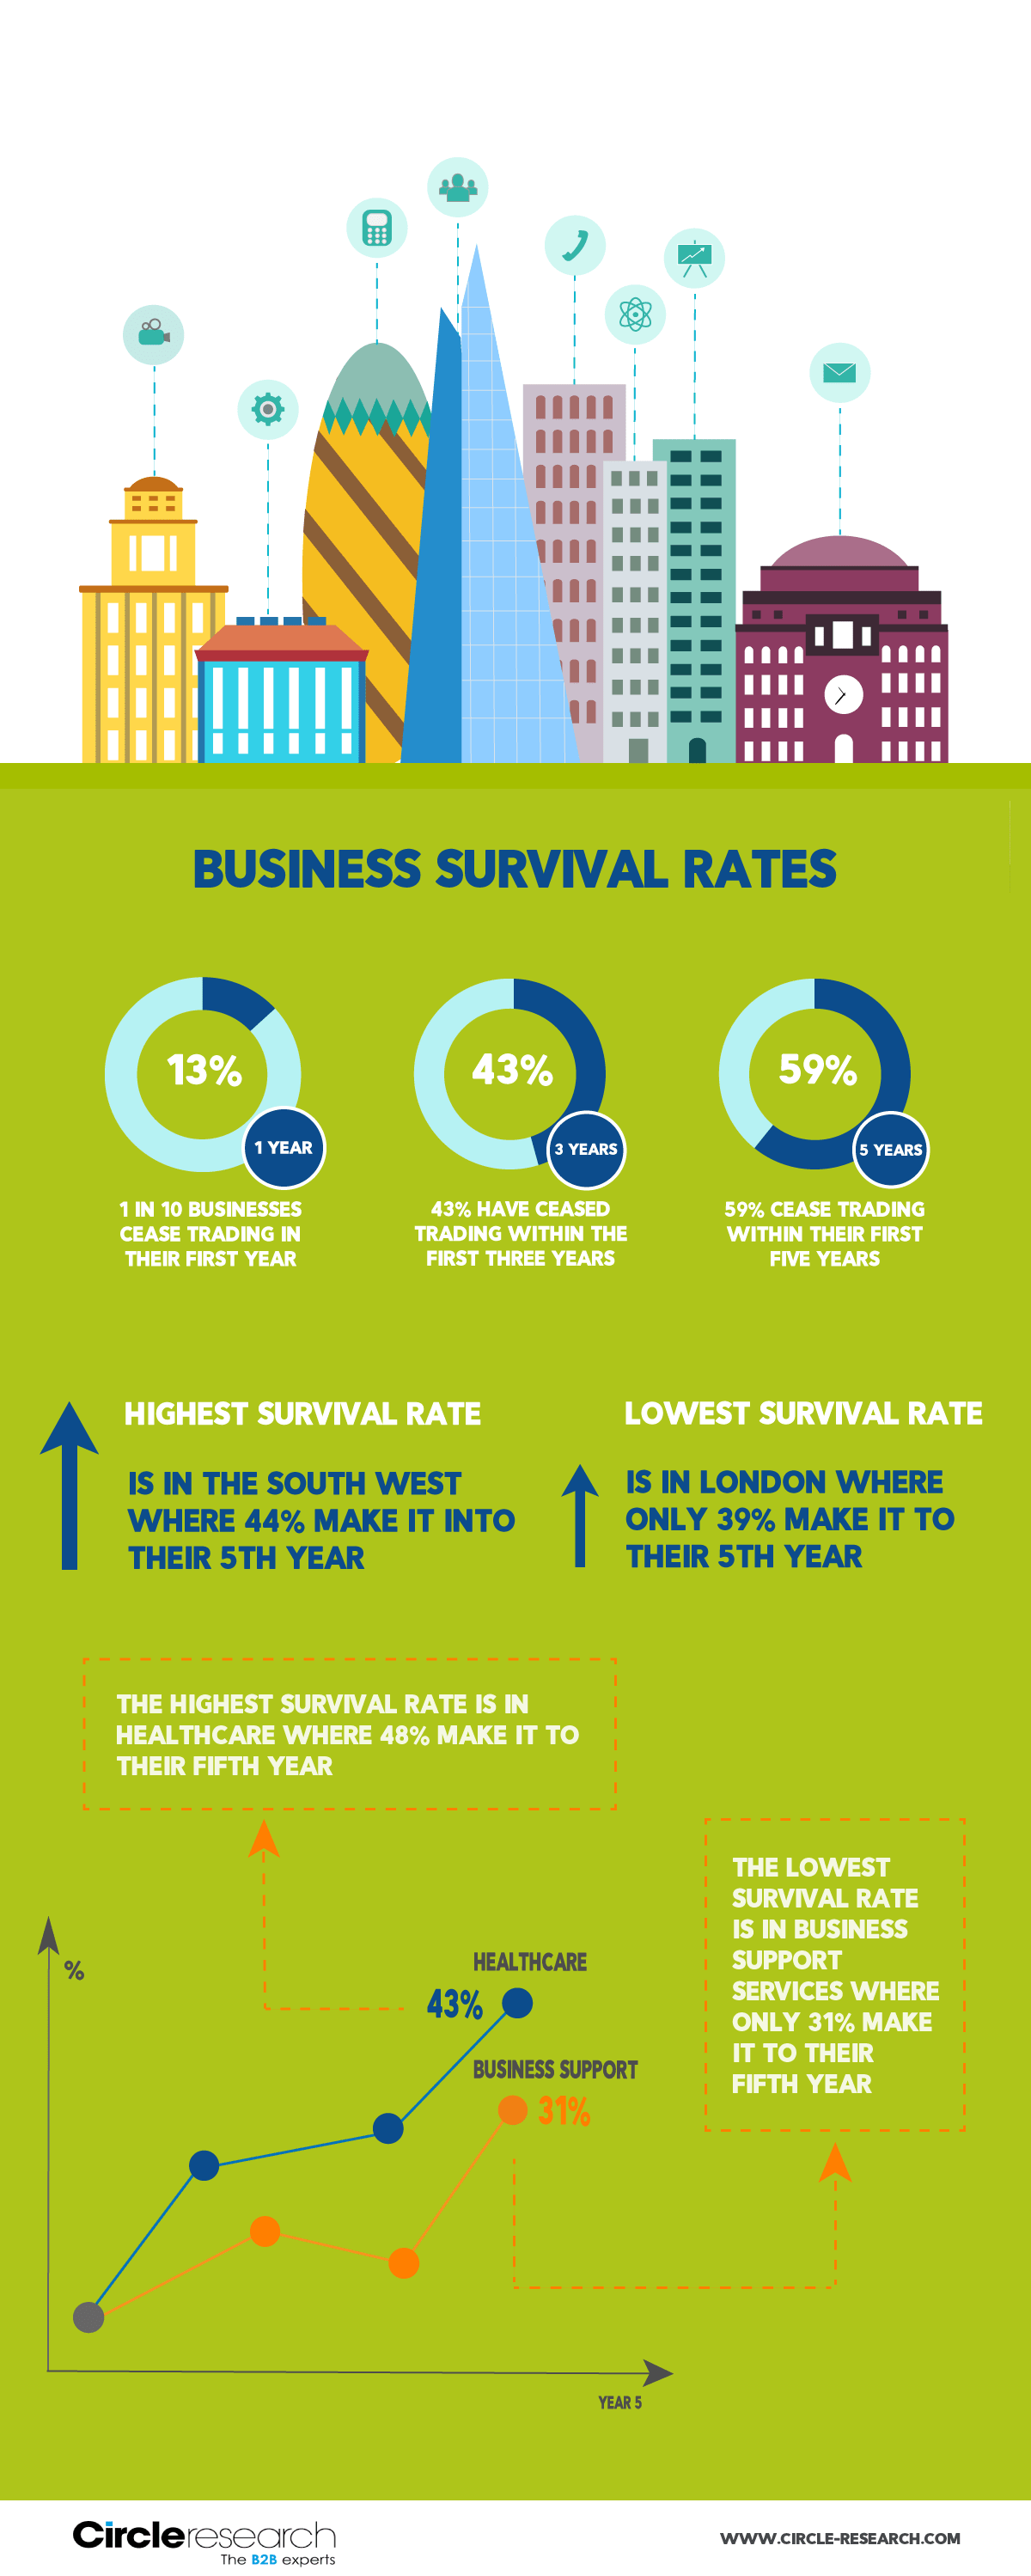 Business survival rates in the UK - infographic